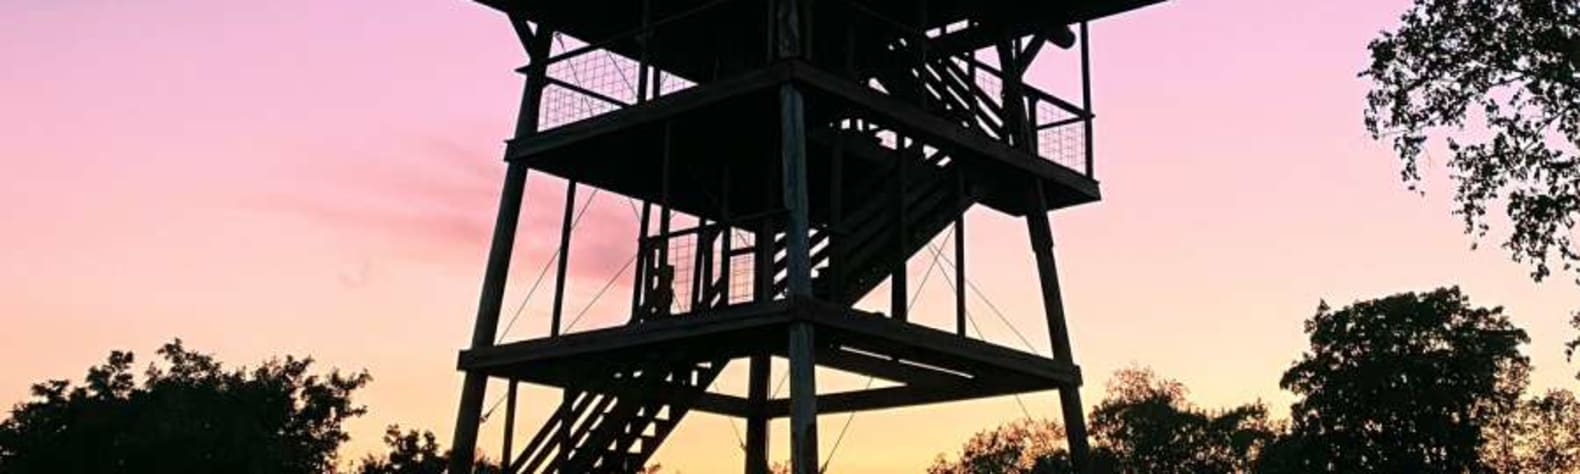 Slateville Retreat ~ Secluded Fire Tower